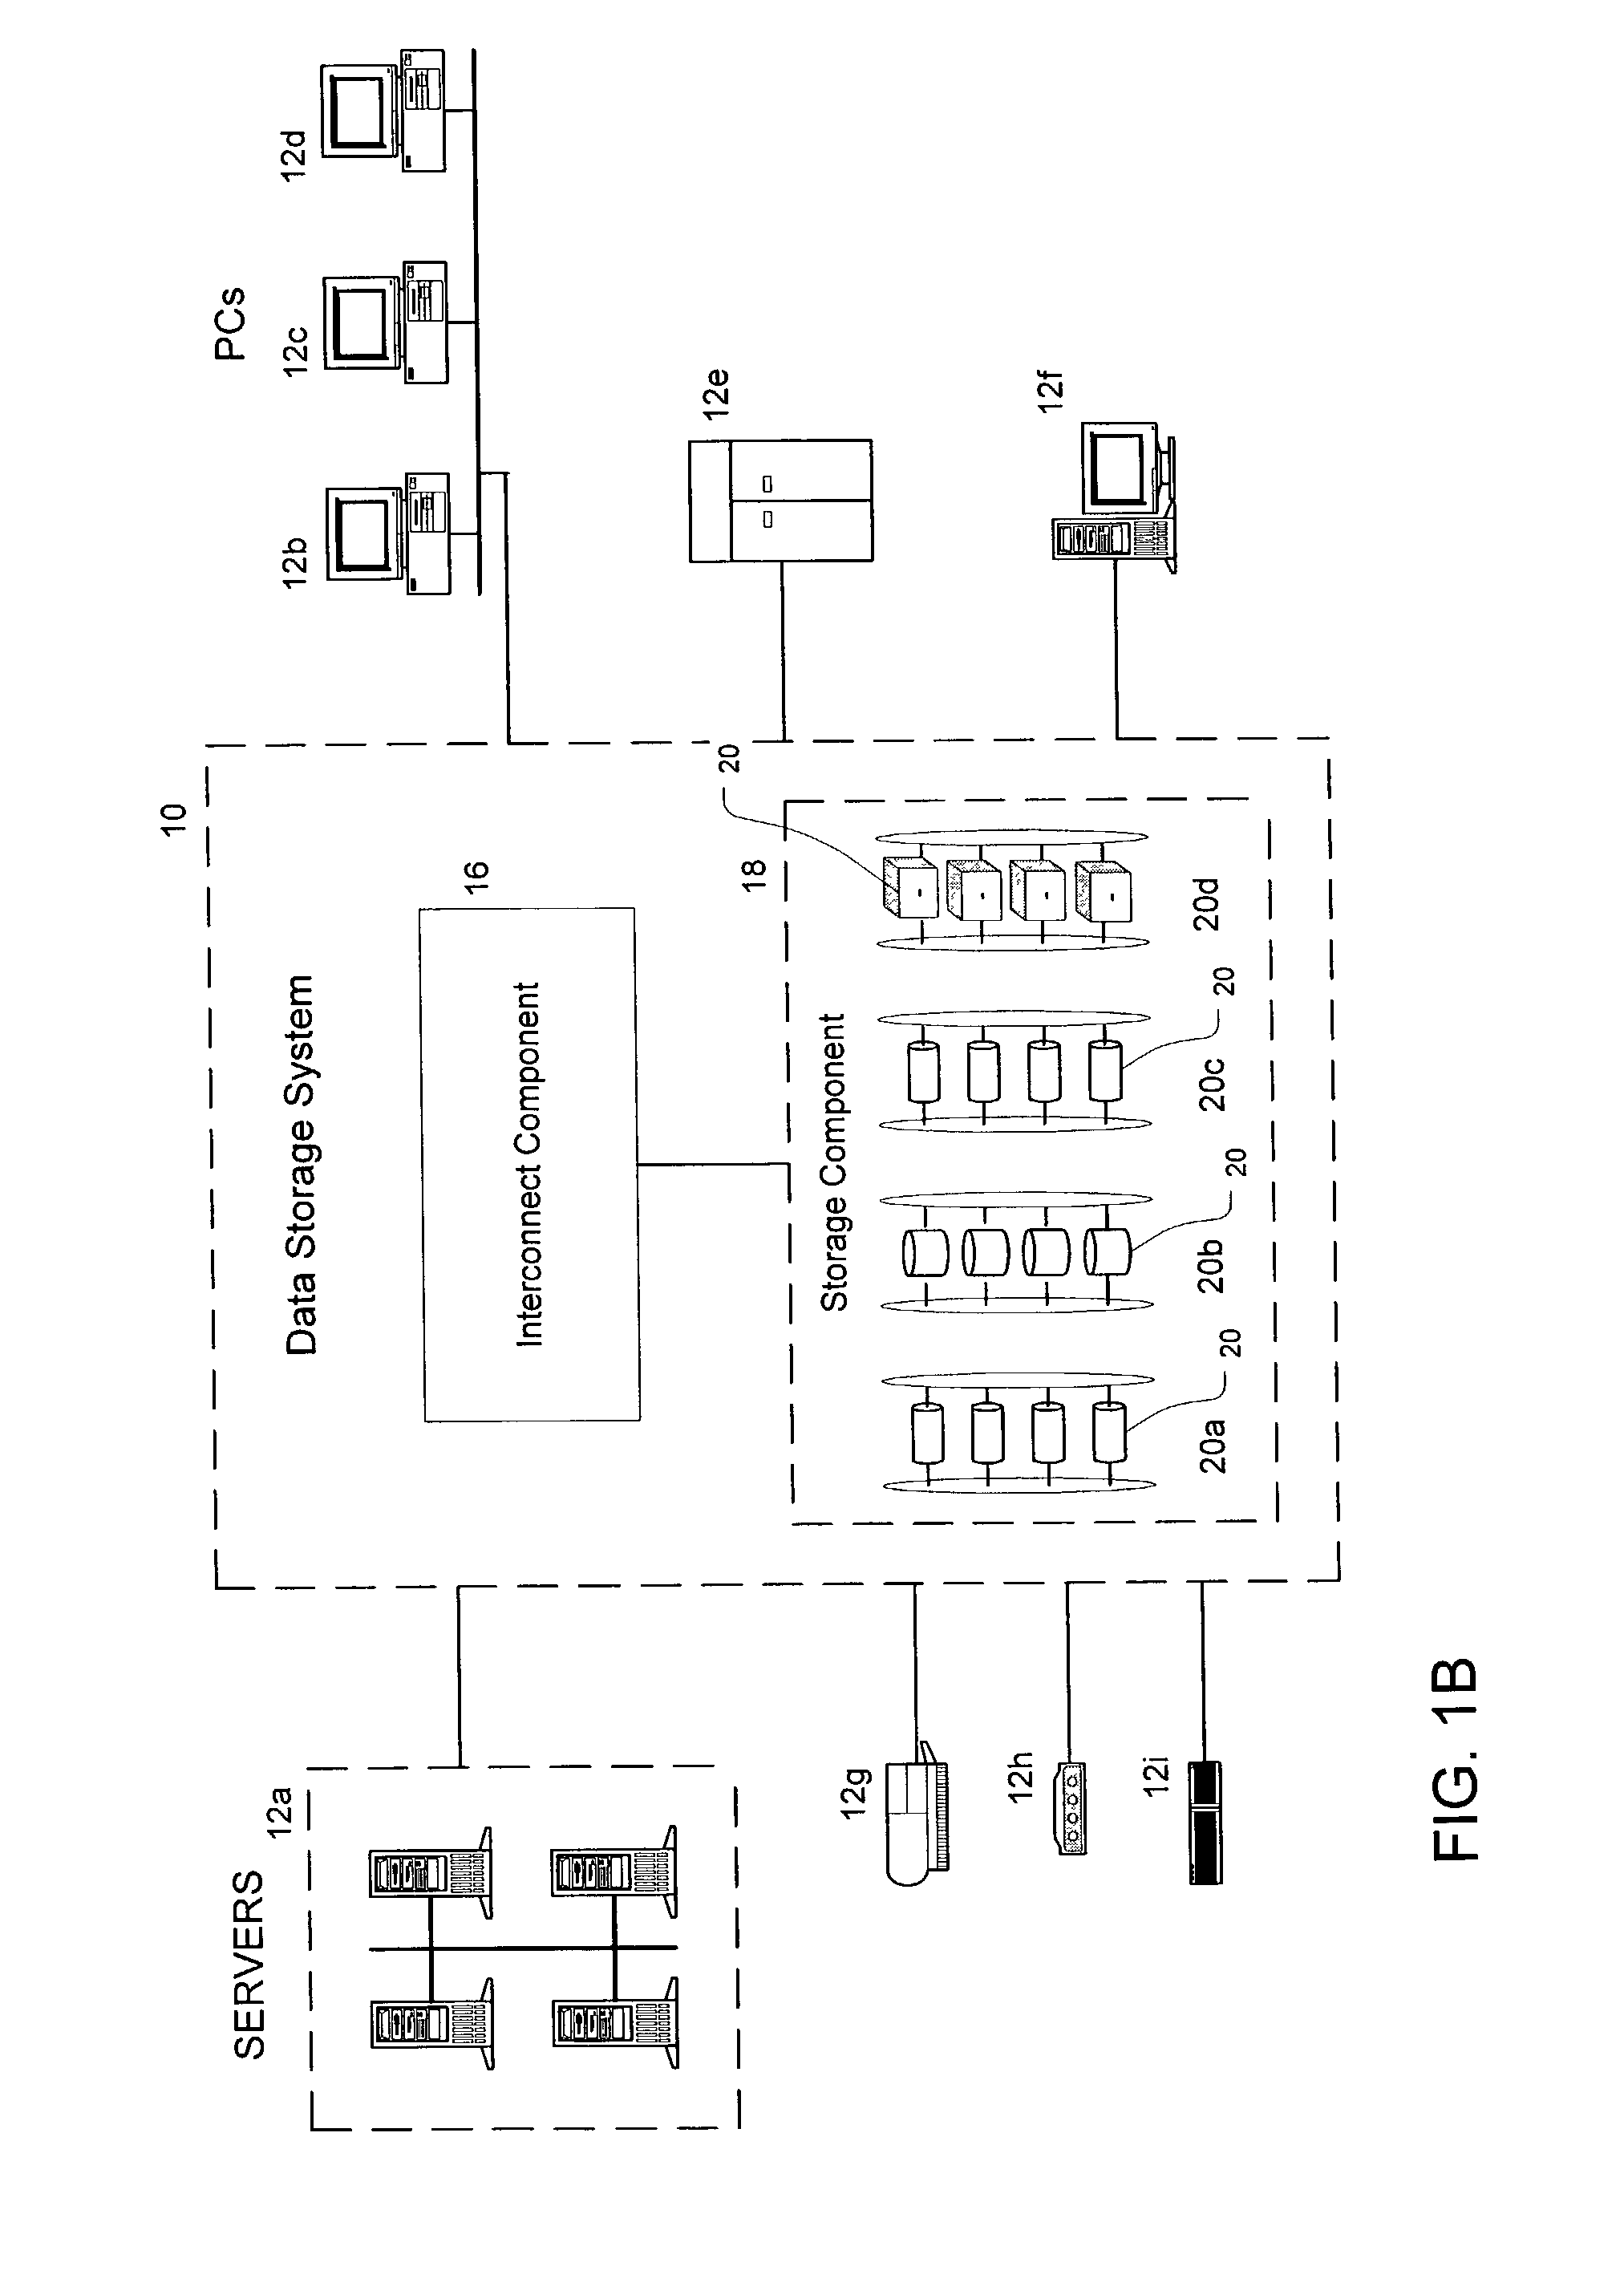 Universal diagnostic hardware space access system for firmware